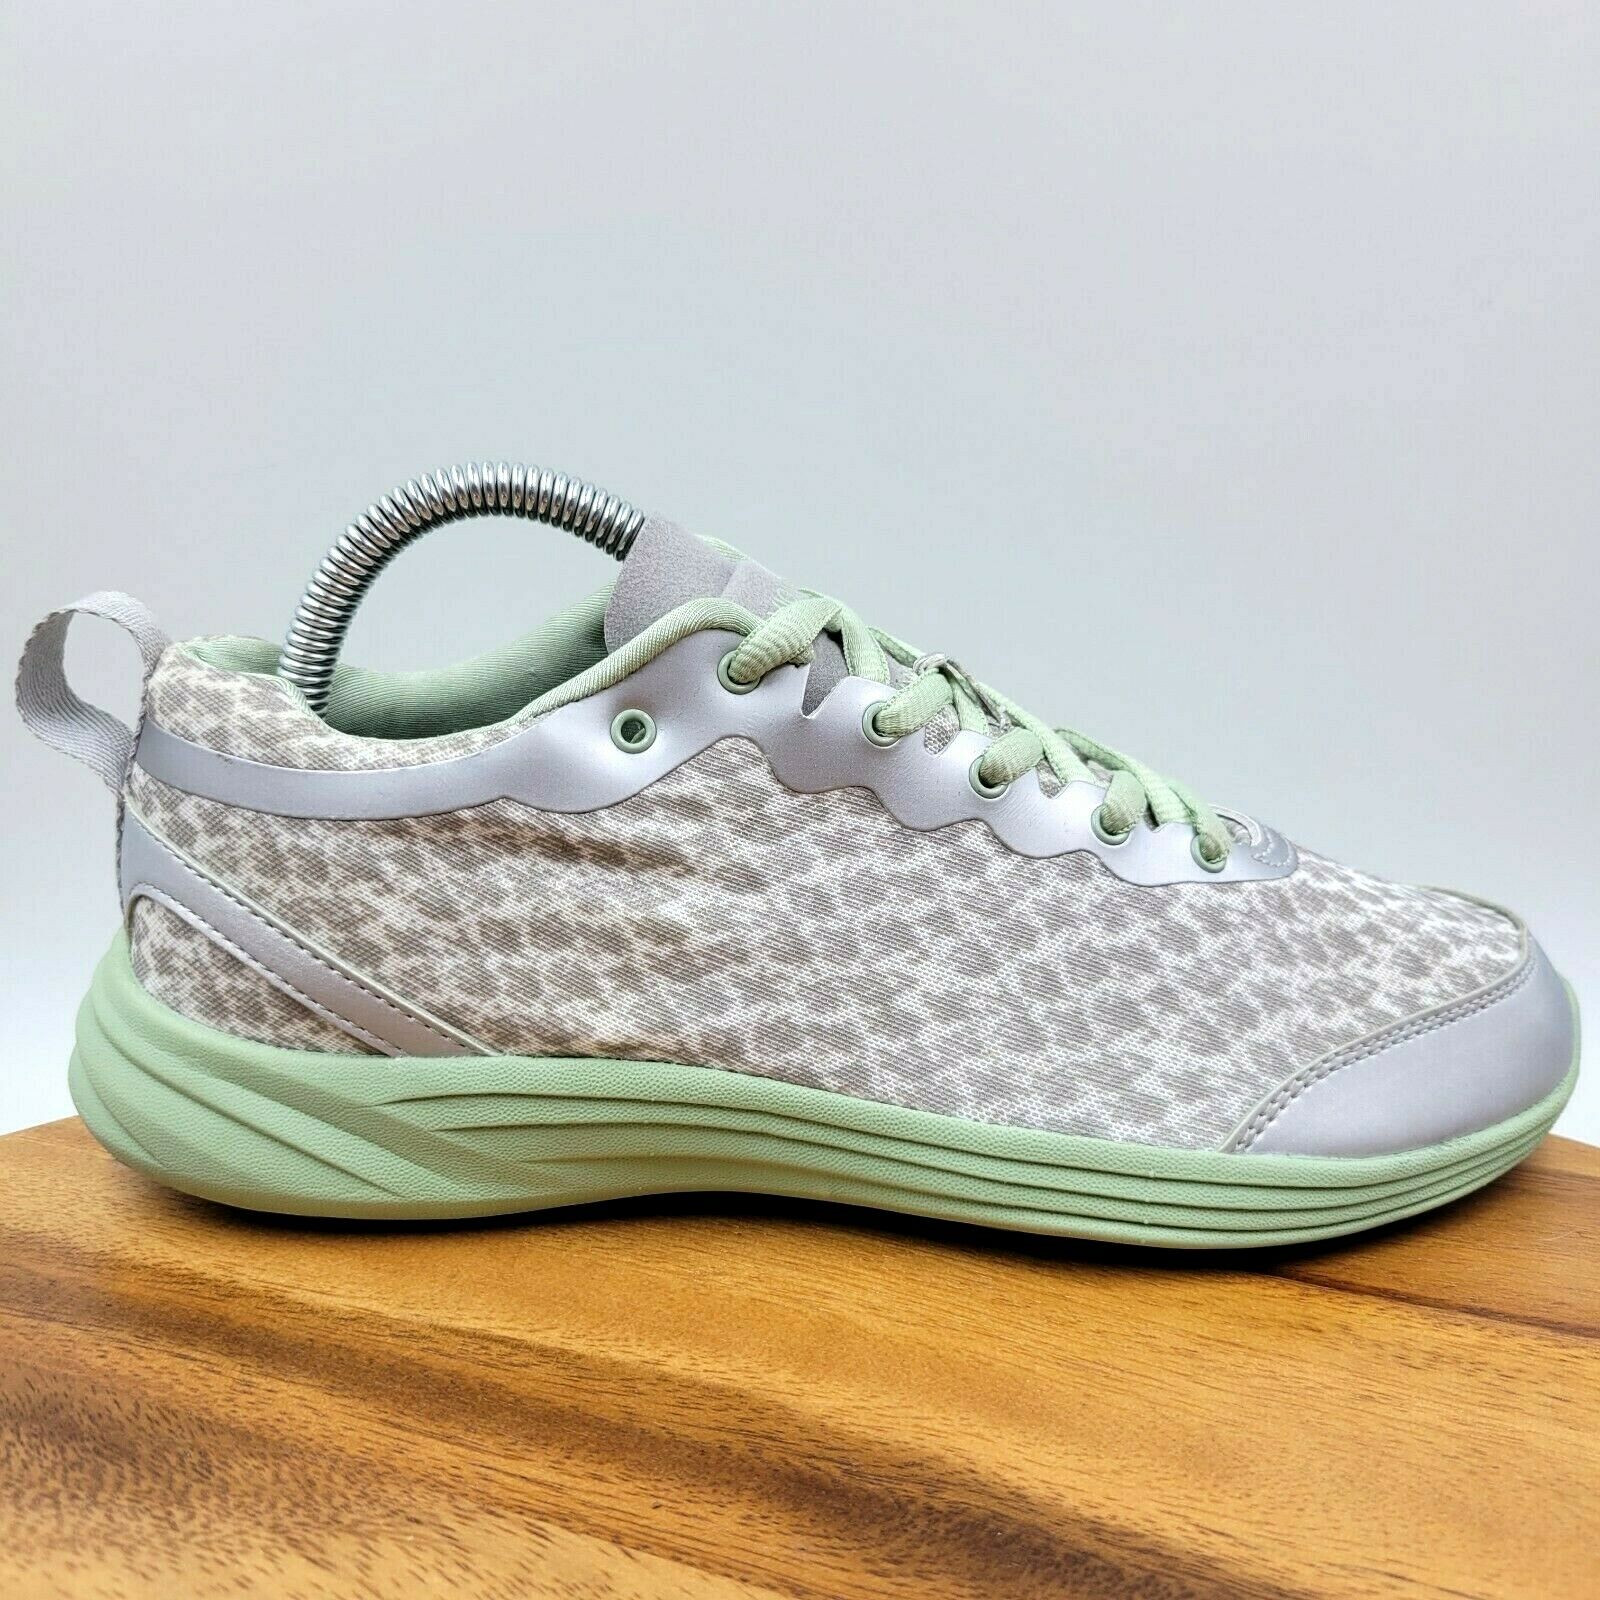 Vionic Python Gray Green Comfort Casual Walking Athletic Sneaker Shoes Women's 8